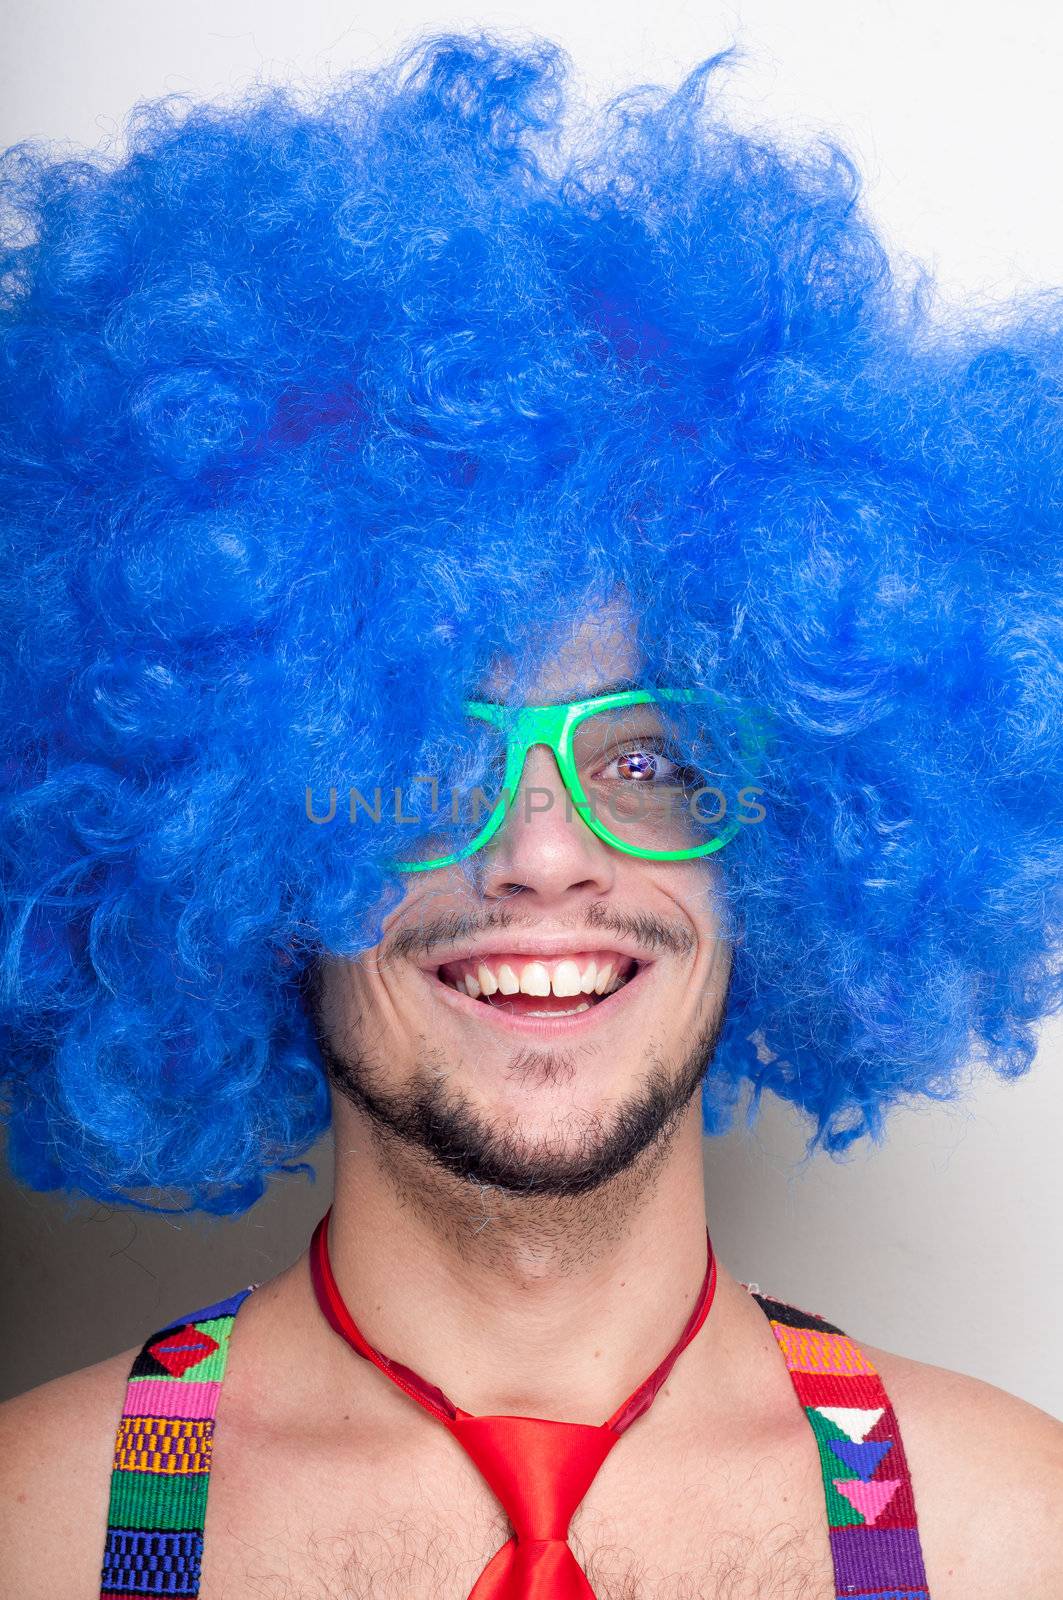 Funny guy naked with blue wig and red tie by peus